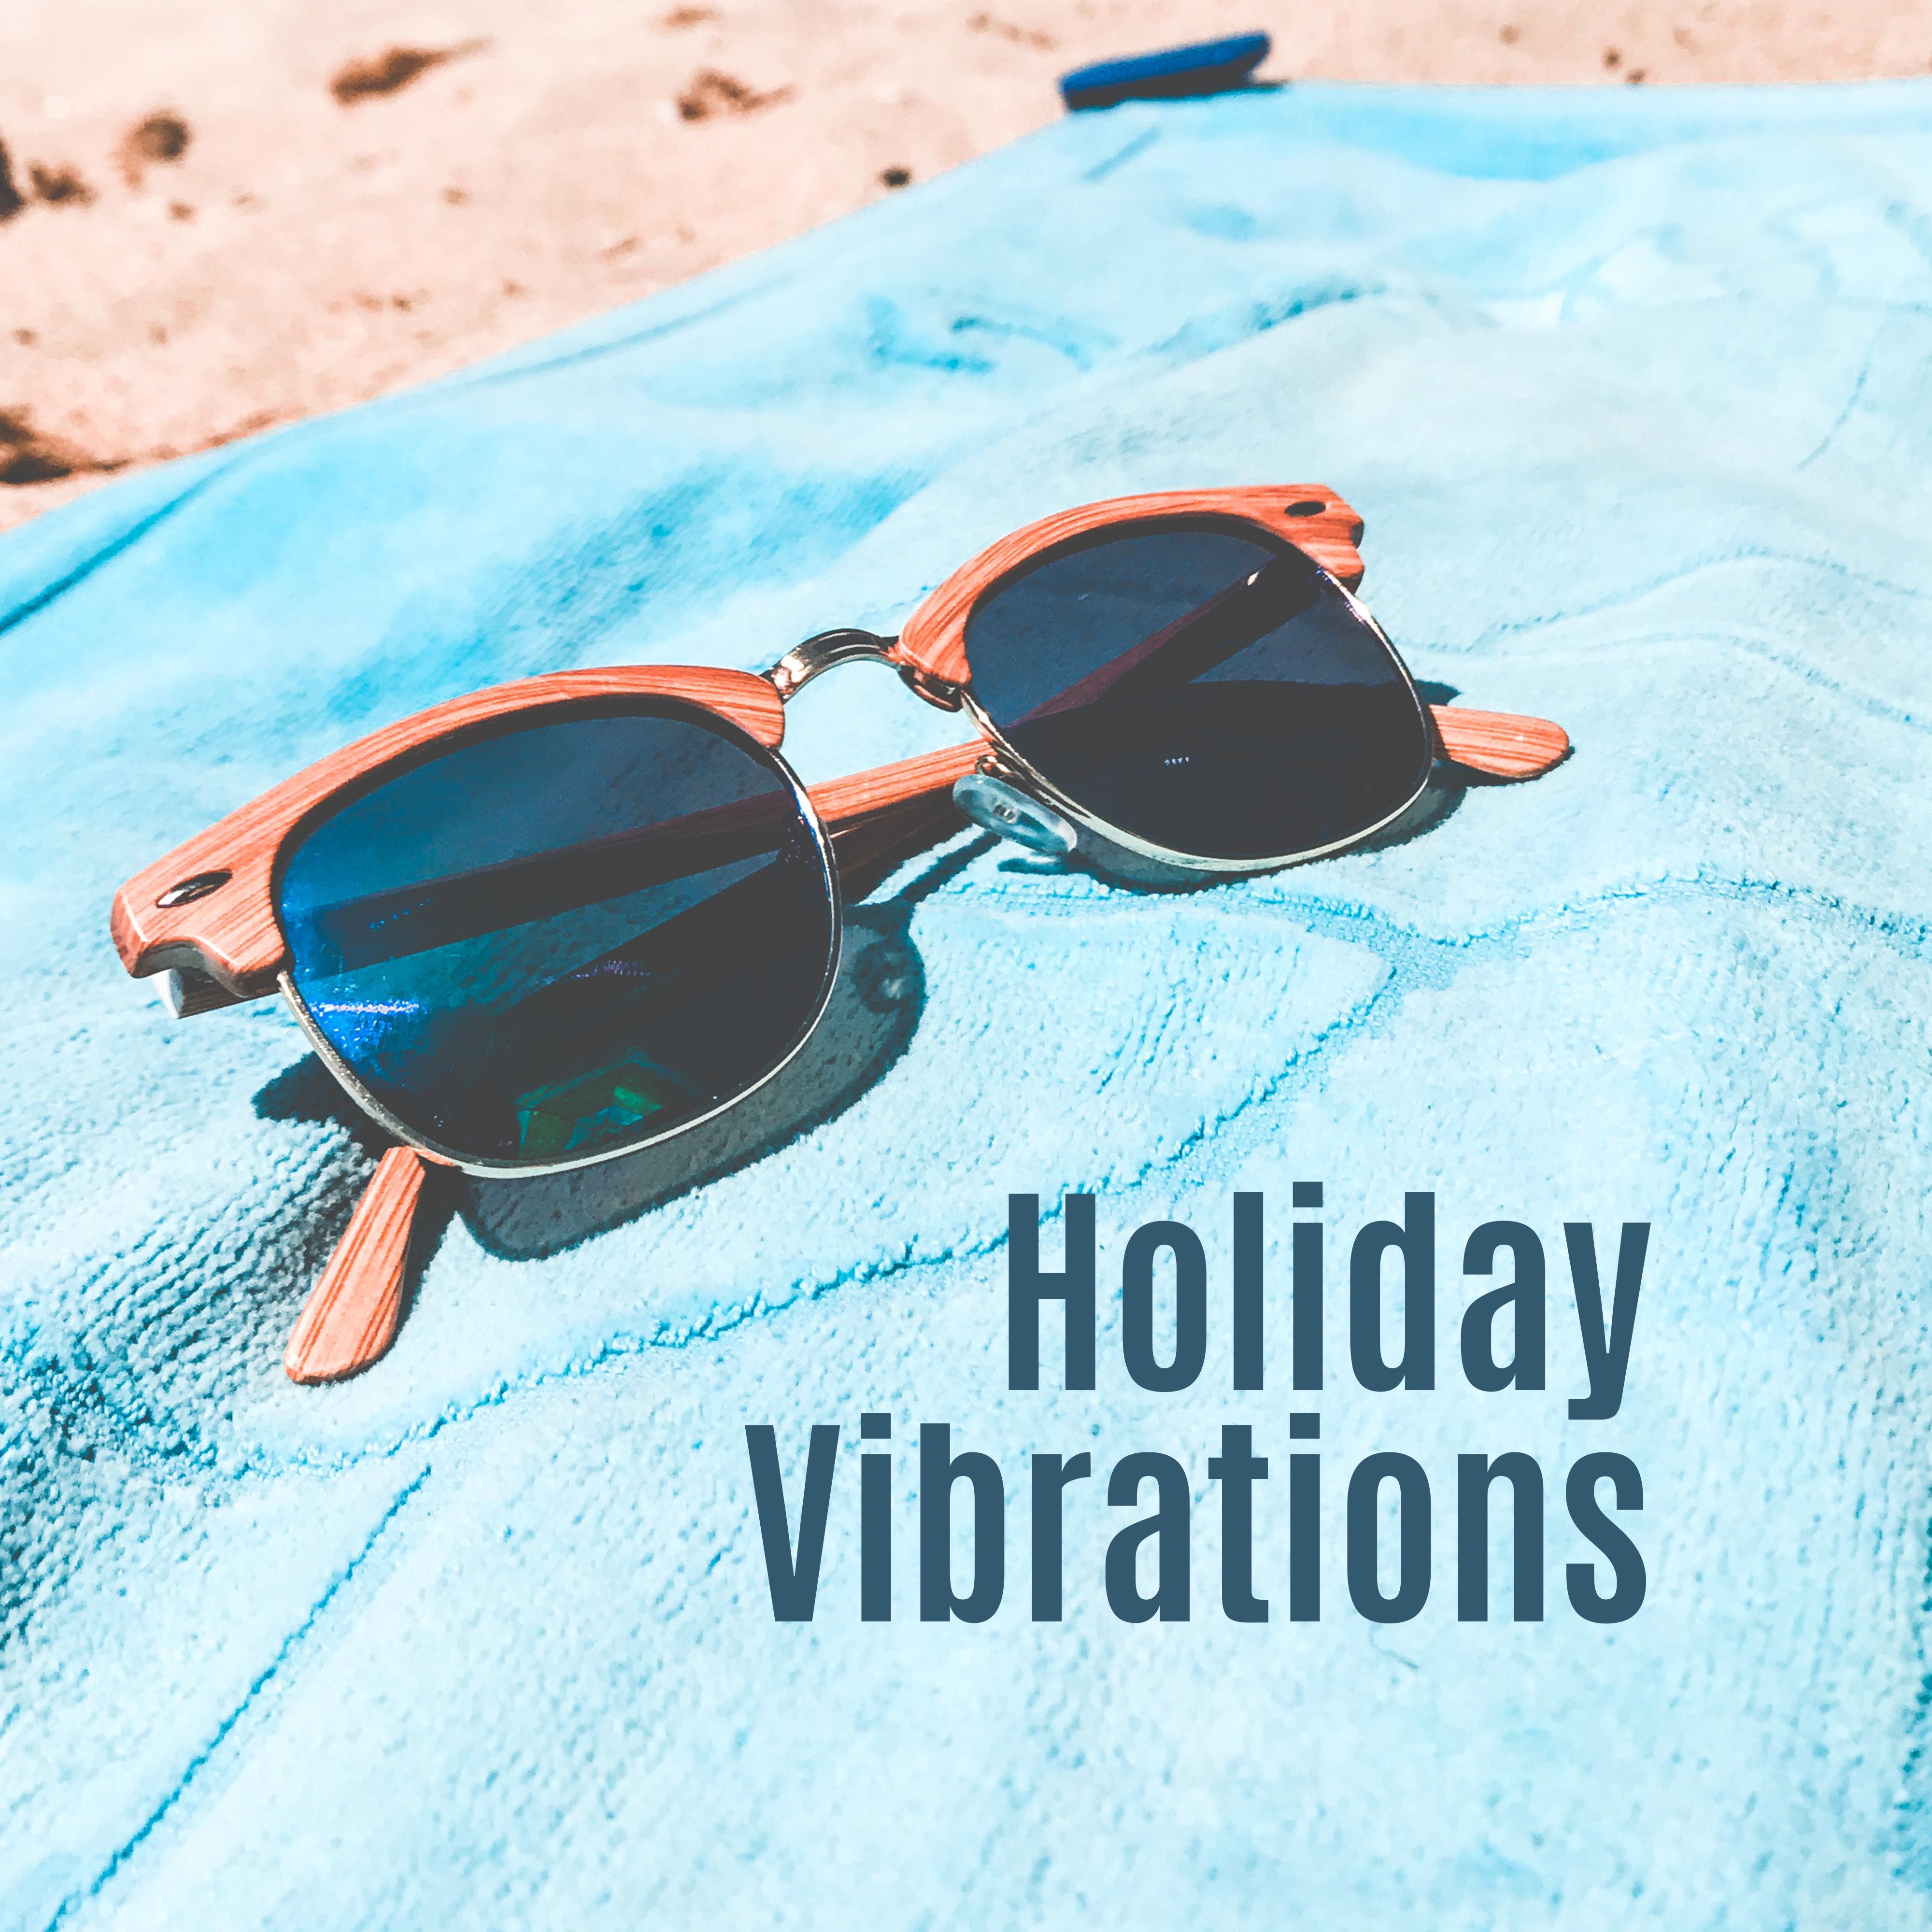 Holiday Vibrations: Ibiza Relaxation, Lounge, Zen, Perfect Rest, Relax, Calm Down, Sunny Chillout